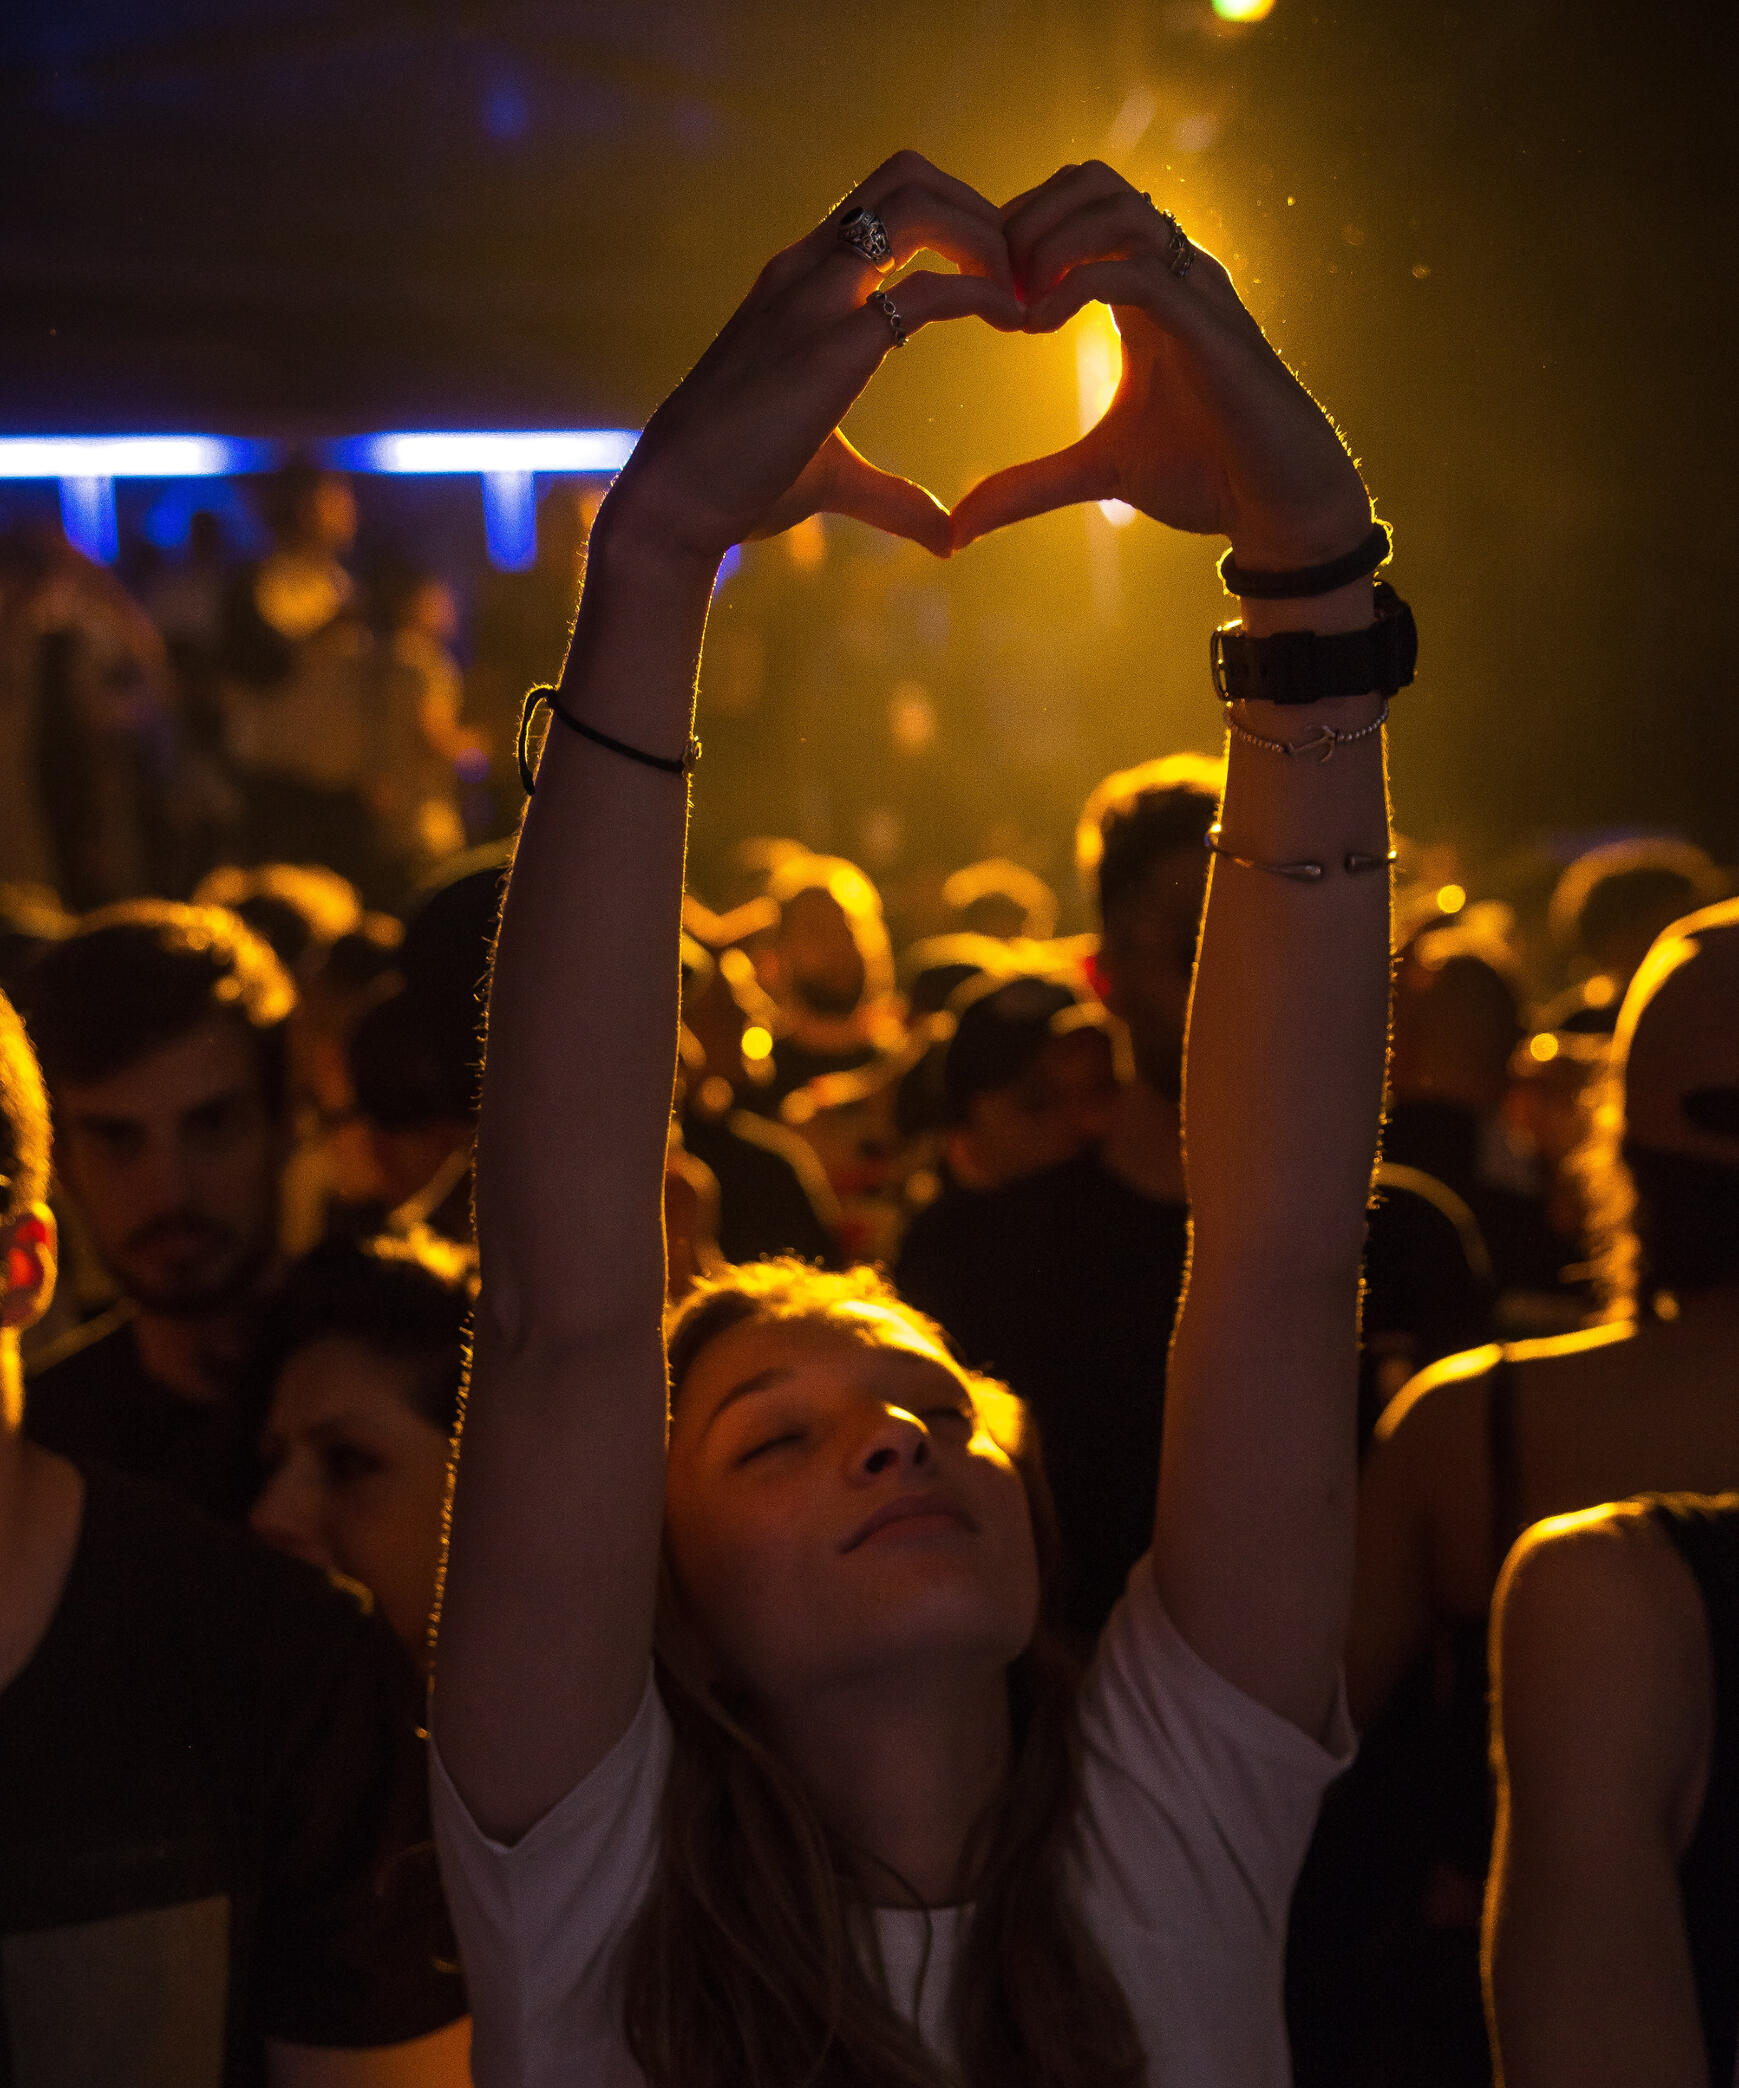 A crowd listening to music with a girl hoiding up a heart shape with her hands.